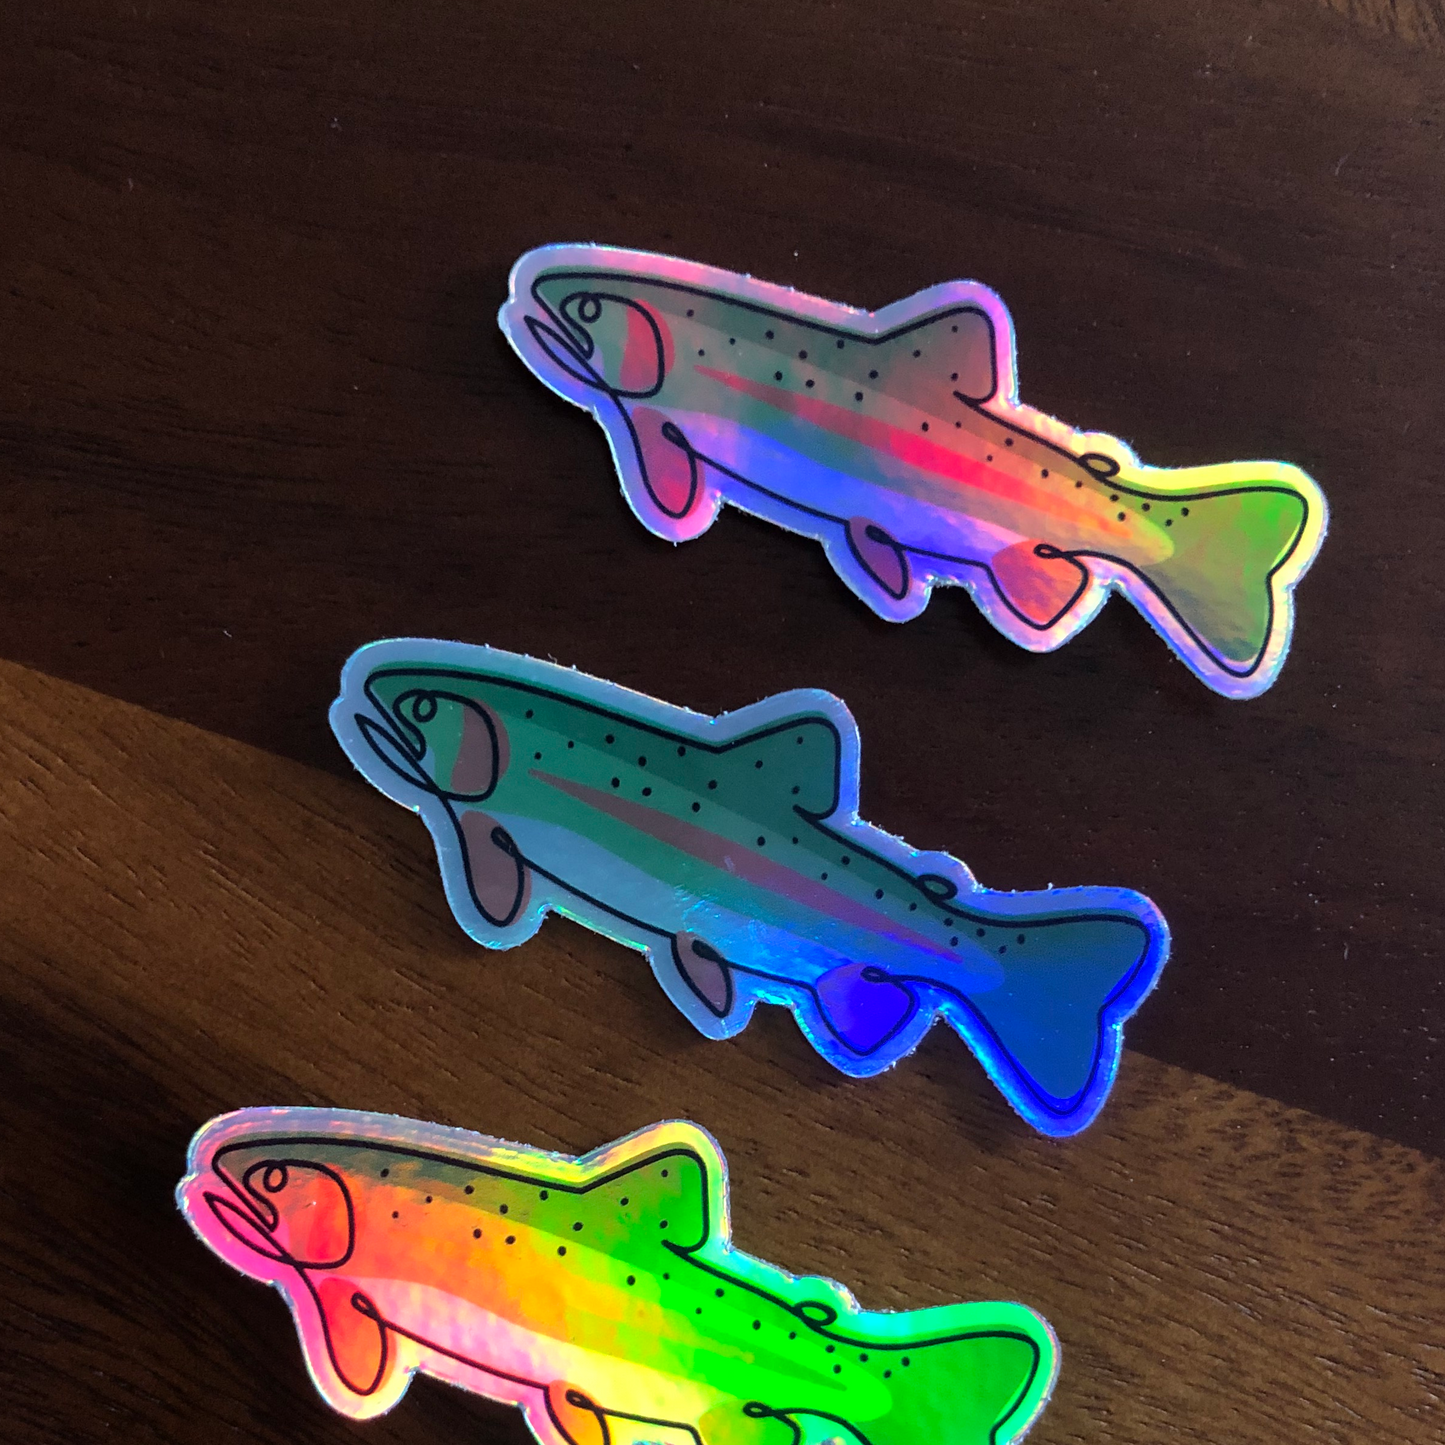 Thunderbird Outdoor SupplyRainbow Trout - Single Line Holographic DecalRainbow Trout - Single Line Holographic Decal
Single Line Contour Illustration of a Rainbow Trout. Weatherproof holographic stickers perfect for your laptop, water bottle, car or whatever else you can stick it 